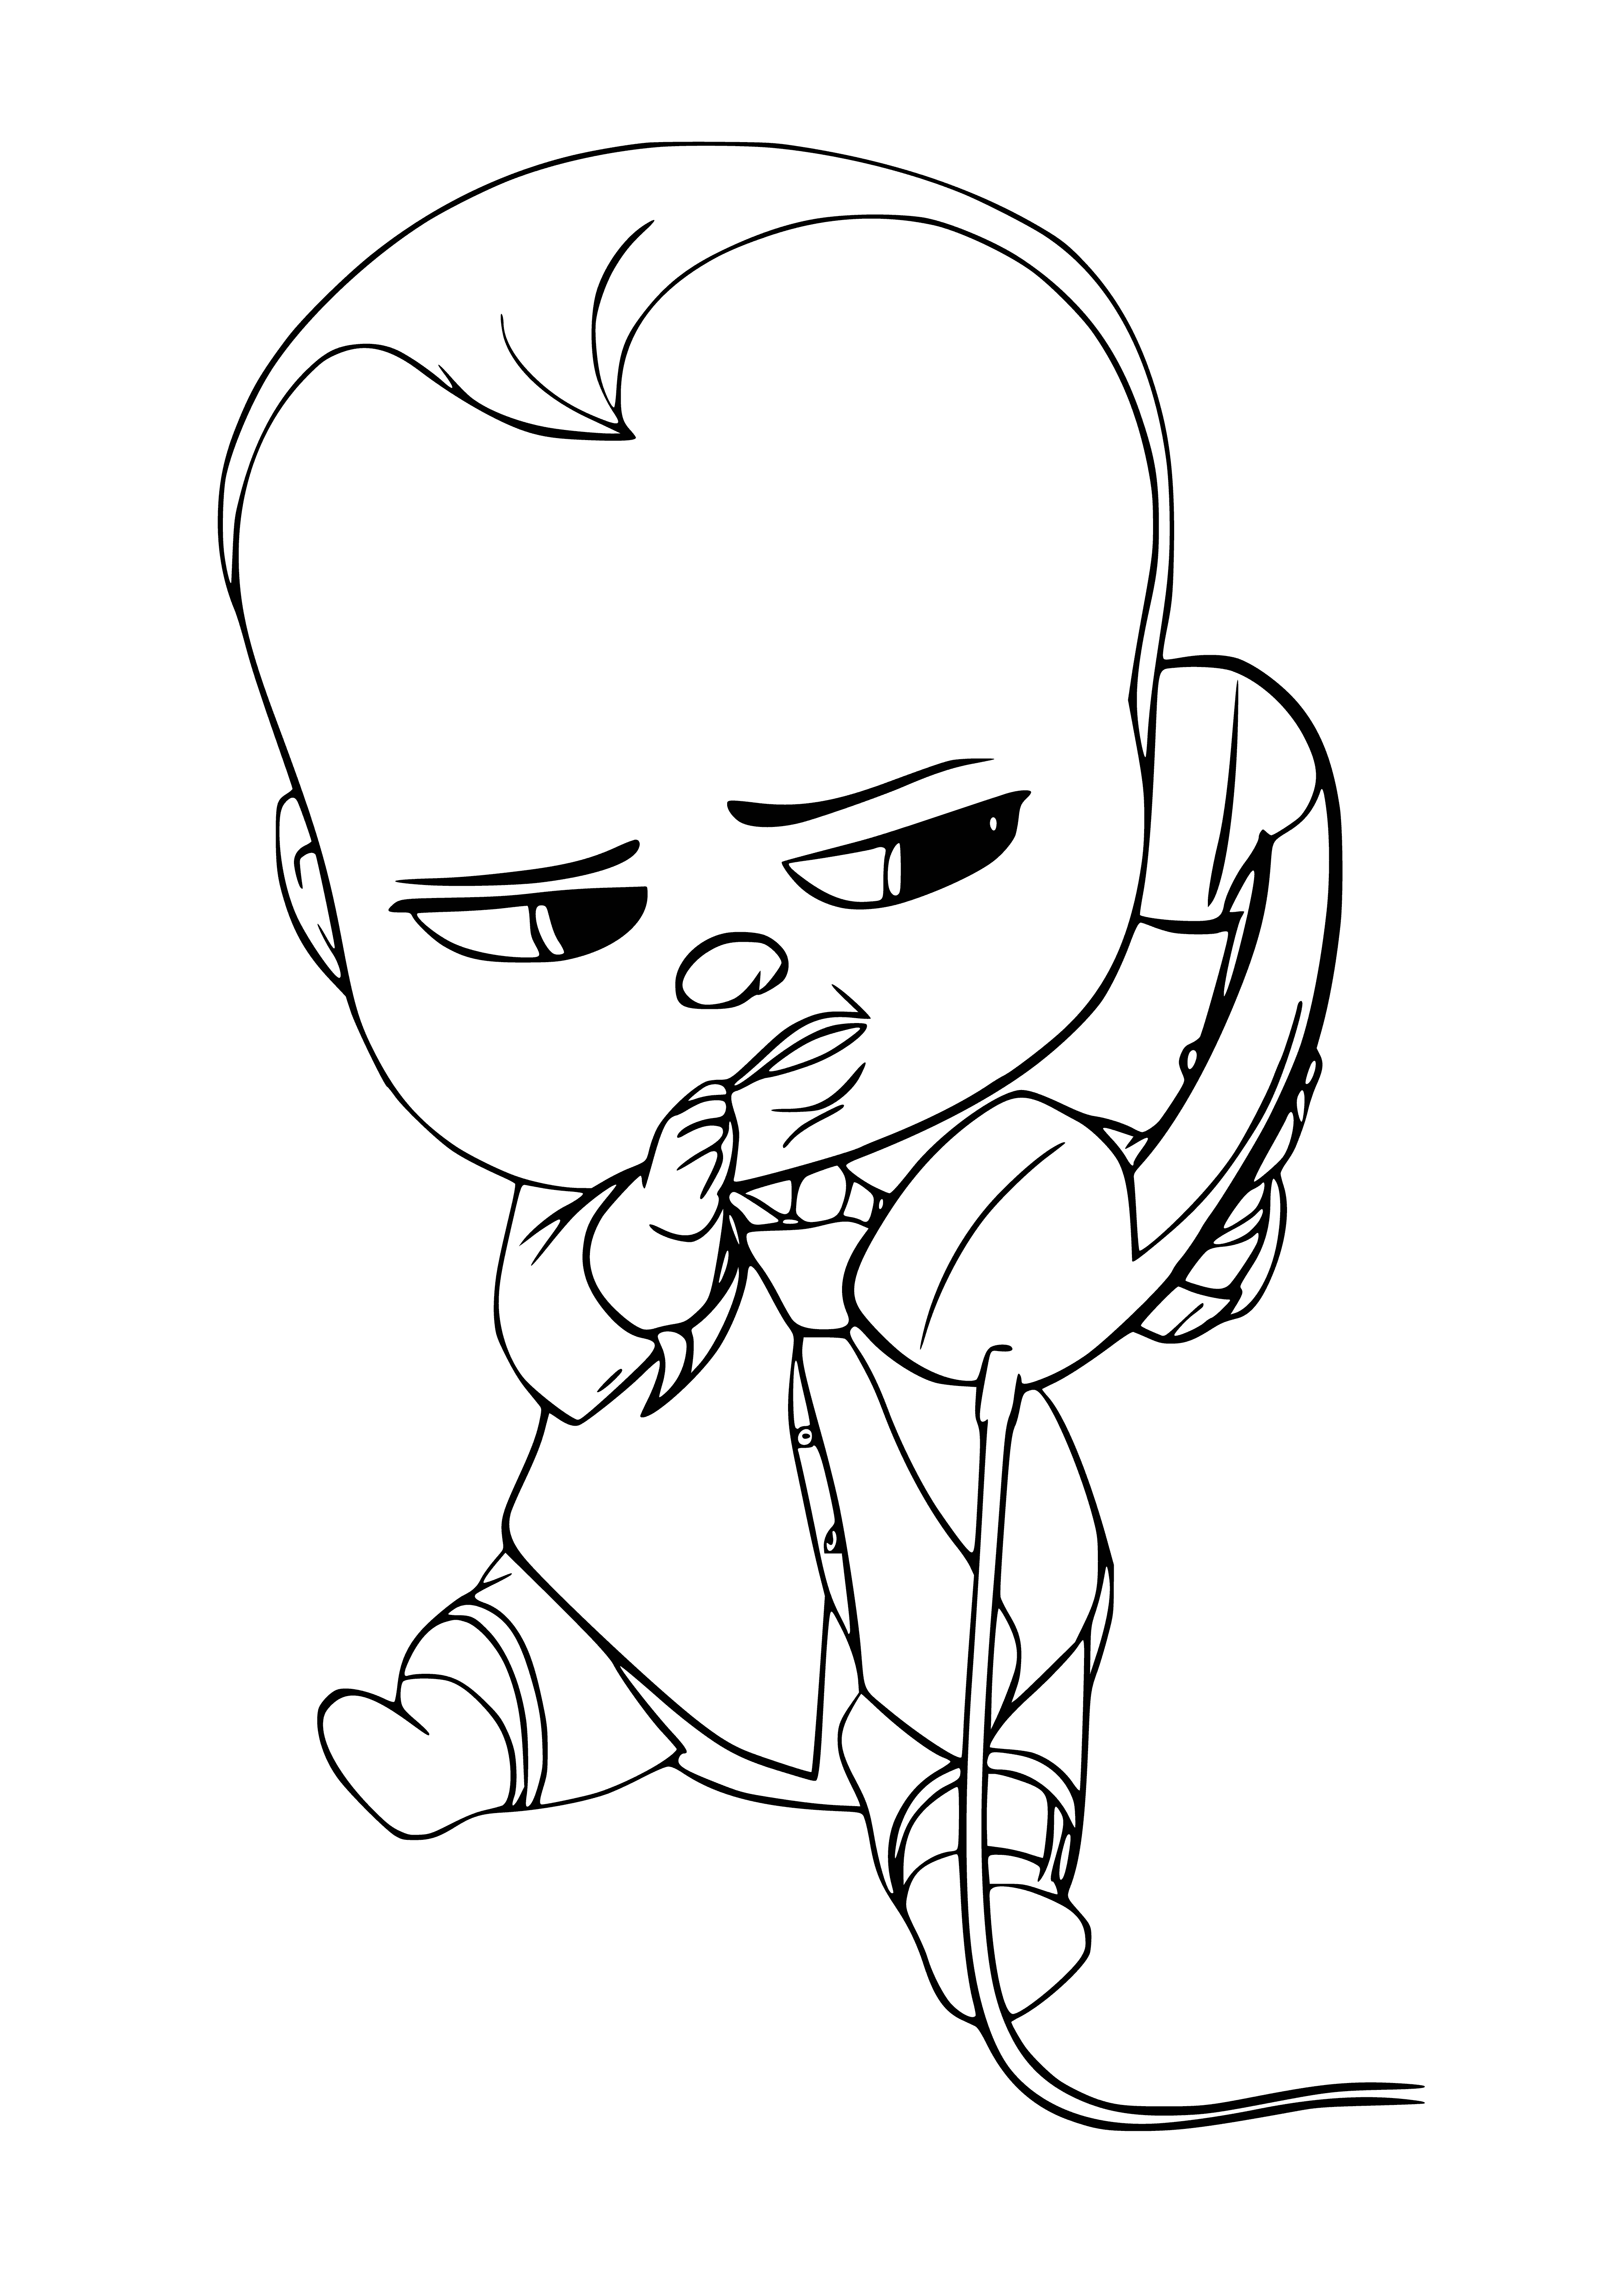 Boss baby boy with telephone receiver coloring page